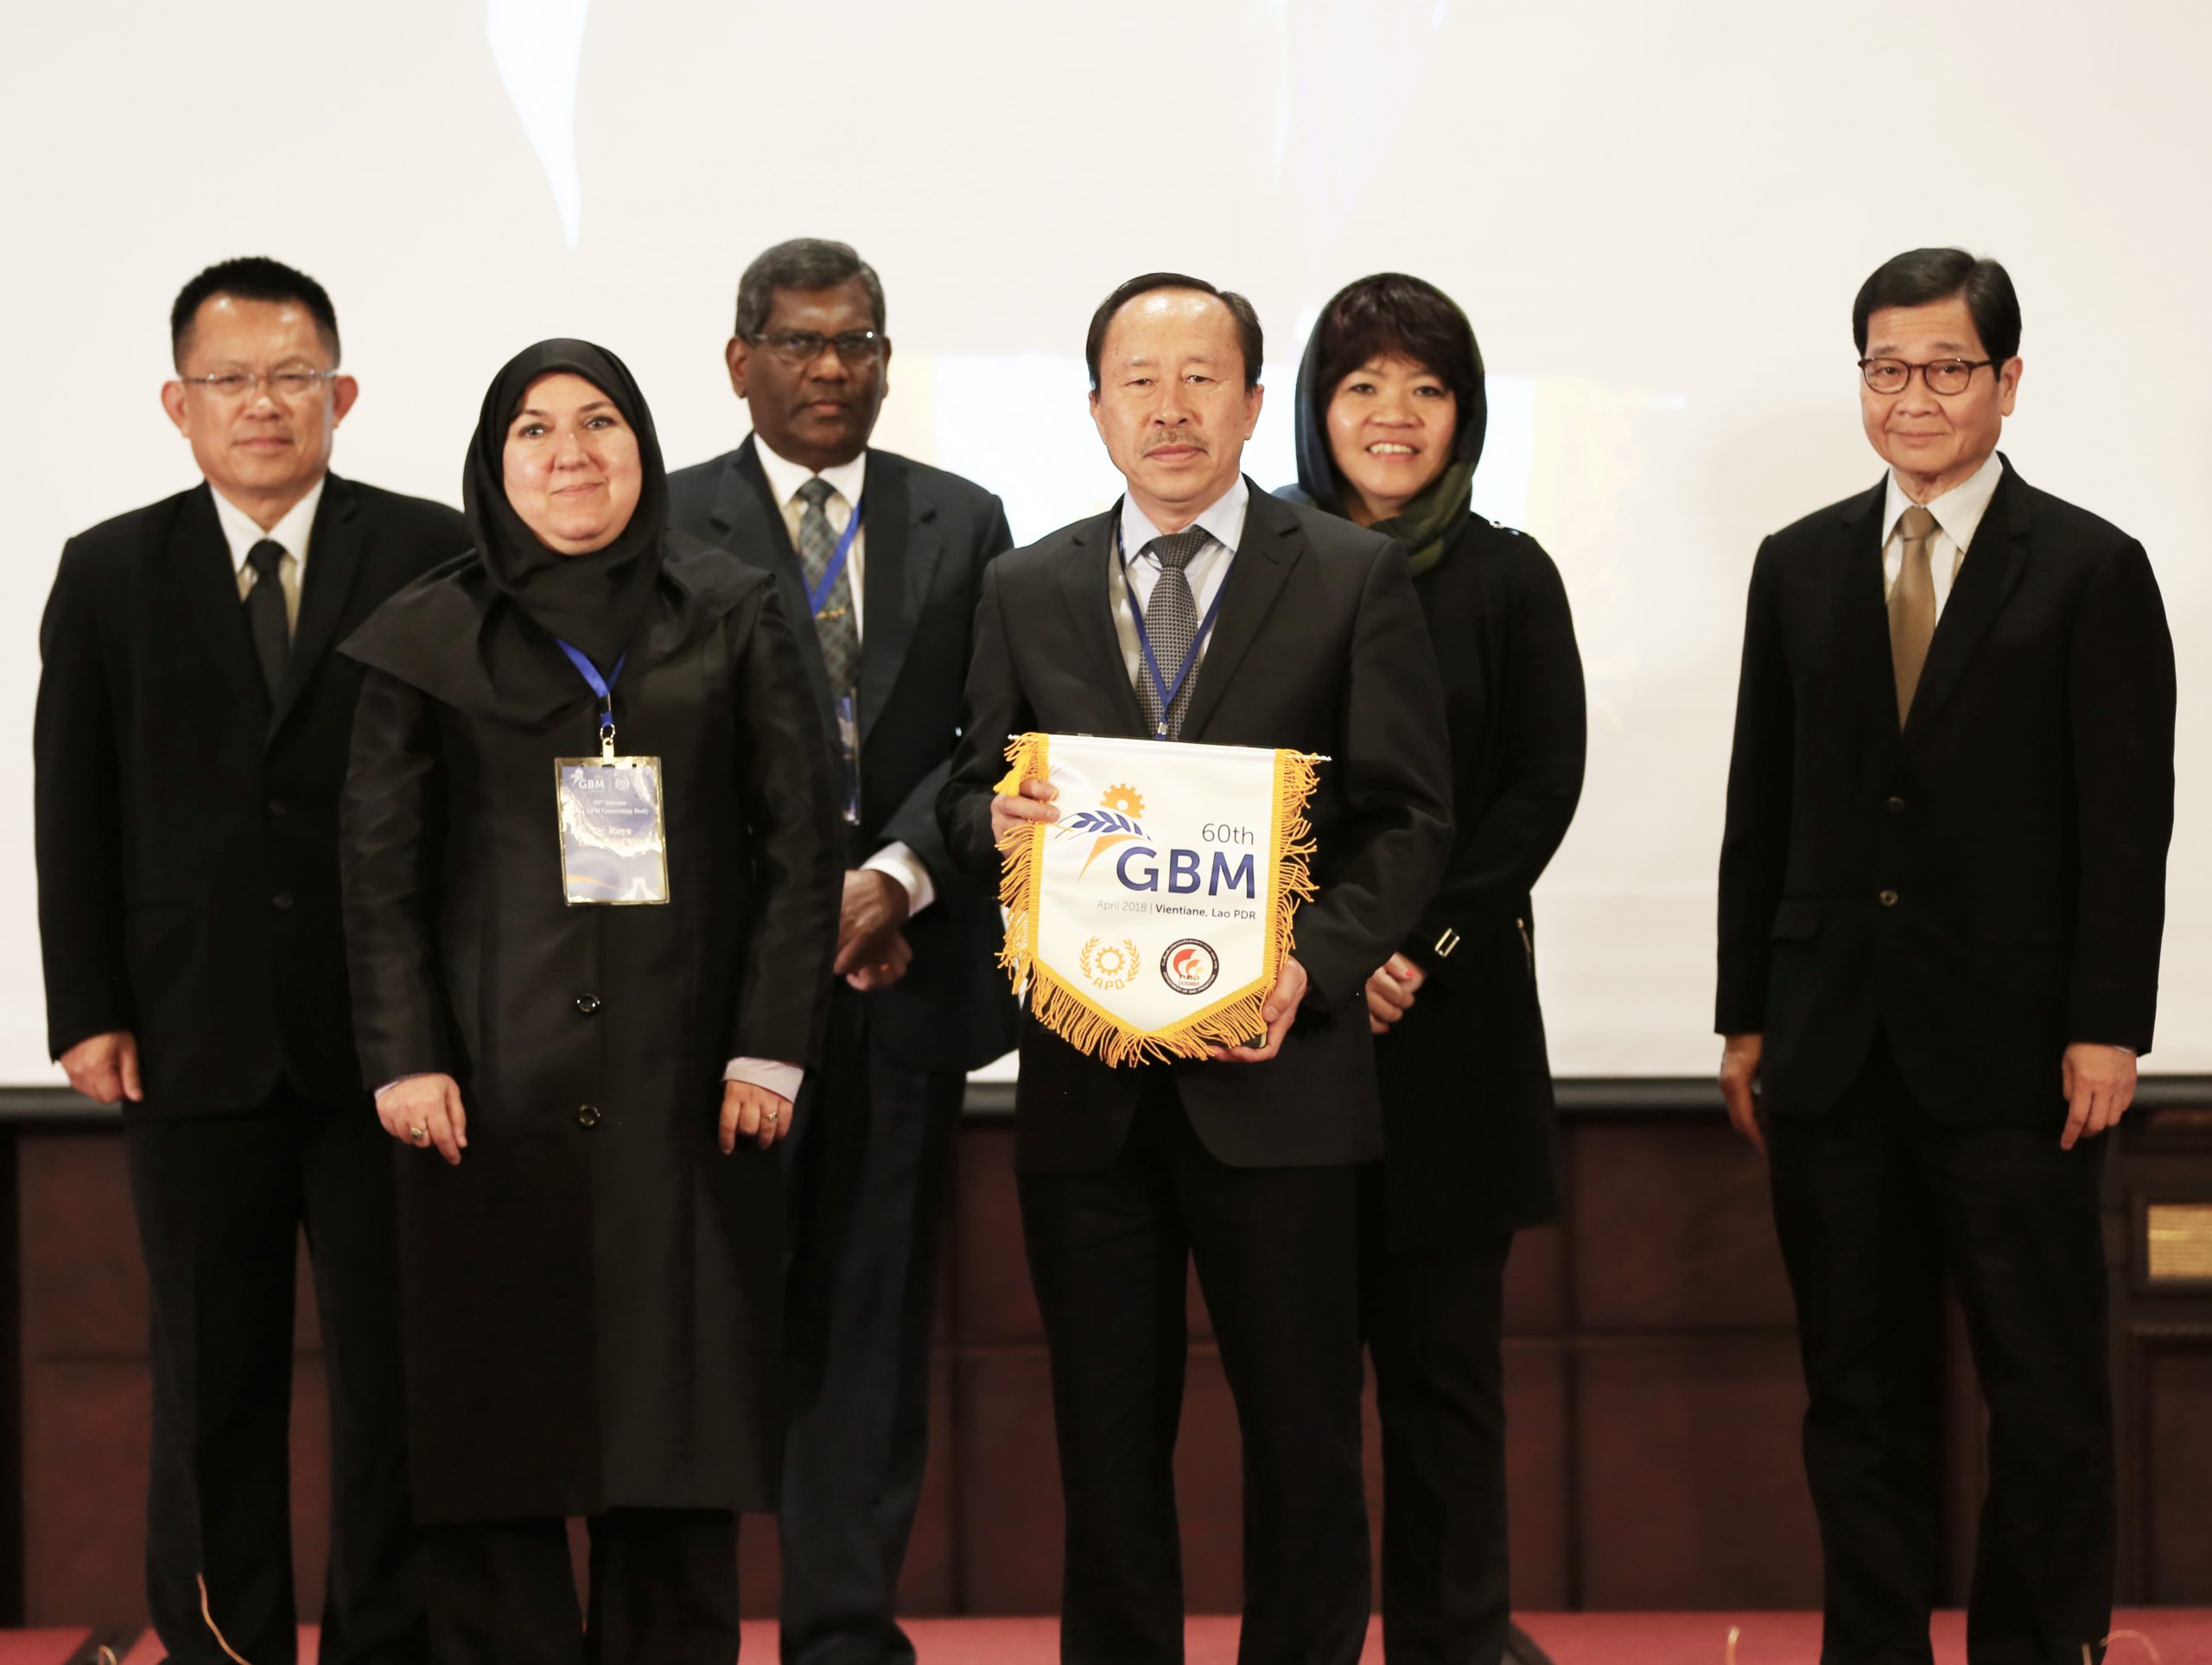 APO Director for IR Iran Dr. Roya Tabatabaei Yazdi (first row L) handing over the GBM flag to 2018 host Lao PDR, represented by APO Director Somdy Inmyxai (R). Looking on were (second row L–R): APO Director for Thailand and Second Vice Chair Dr. Somchai Harnhirun; APO Director for Sri Lanka and First Vice Chair Javigodage Jayadewa Rathnasiri; APO Director for Singapore and Chair Chew Mok Lee; and APO Secretary-General Dr. Santhi Kanoktanaporn.